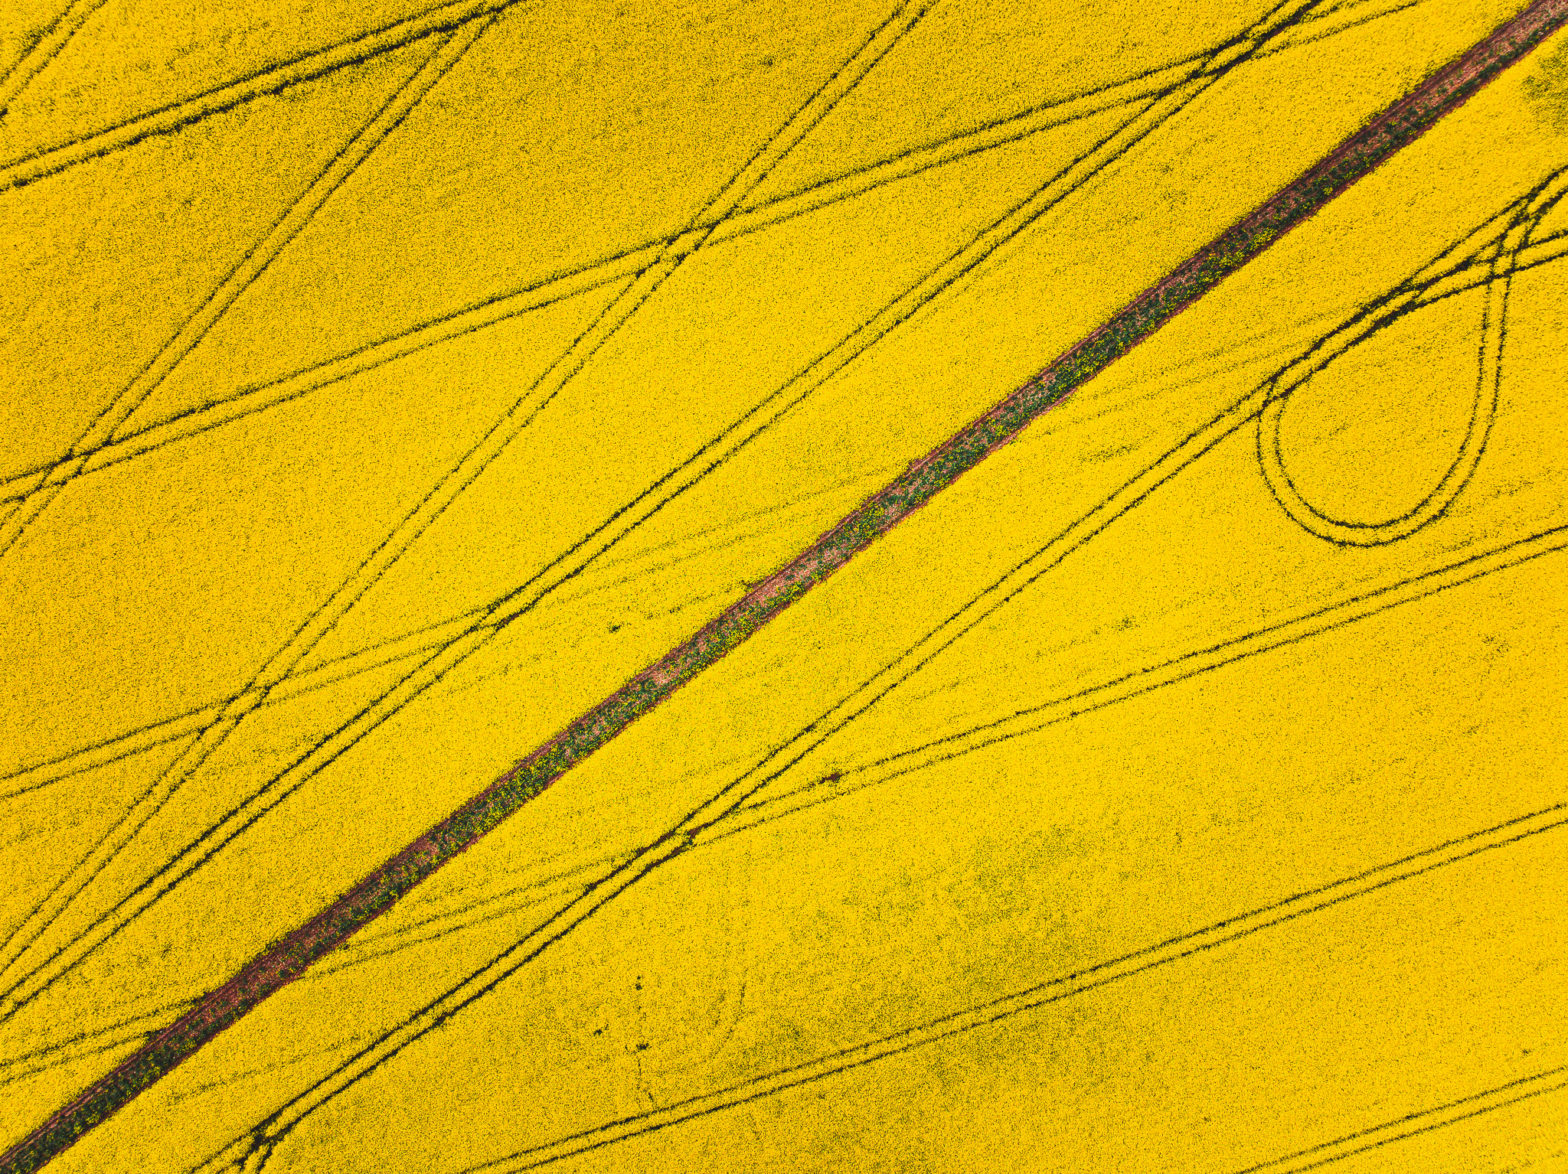 Top down view of yellow rapeseed field in bloom with diagonal patterns created by tractor tracks